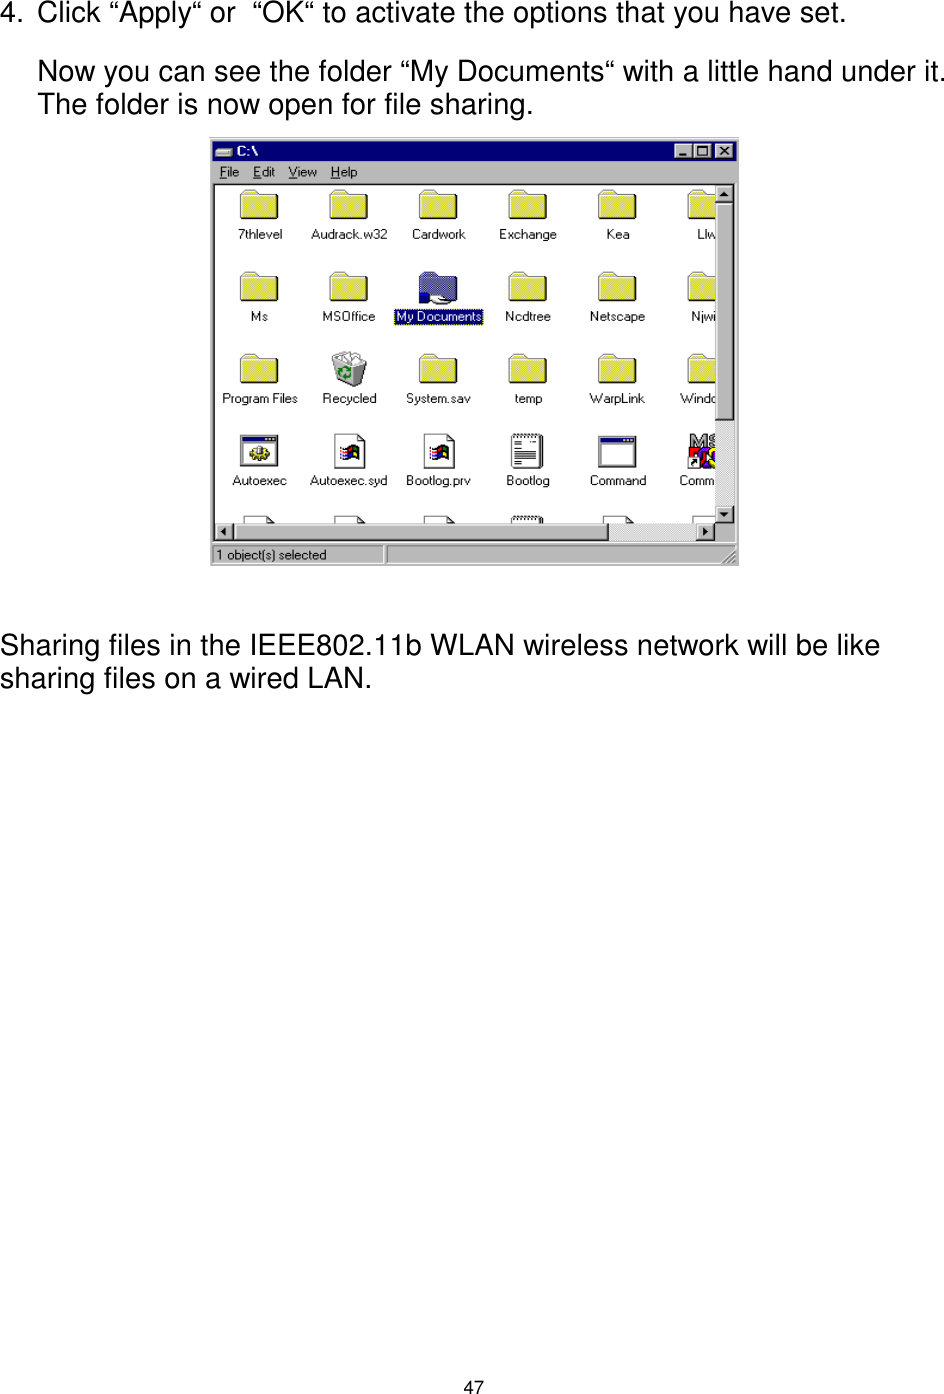  47   4.  Click “Apply“ or  “OK“ to activate the options that you have set. Now you can see the folder “My Documents“ with a little hand under it.  The folder is now open for file sharing.               Sharing files in the IEEE802.11b WLAN wireless network will be like sharing files on a wired LAN. 